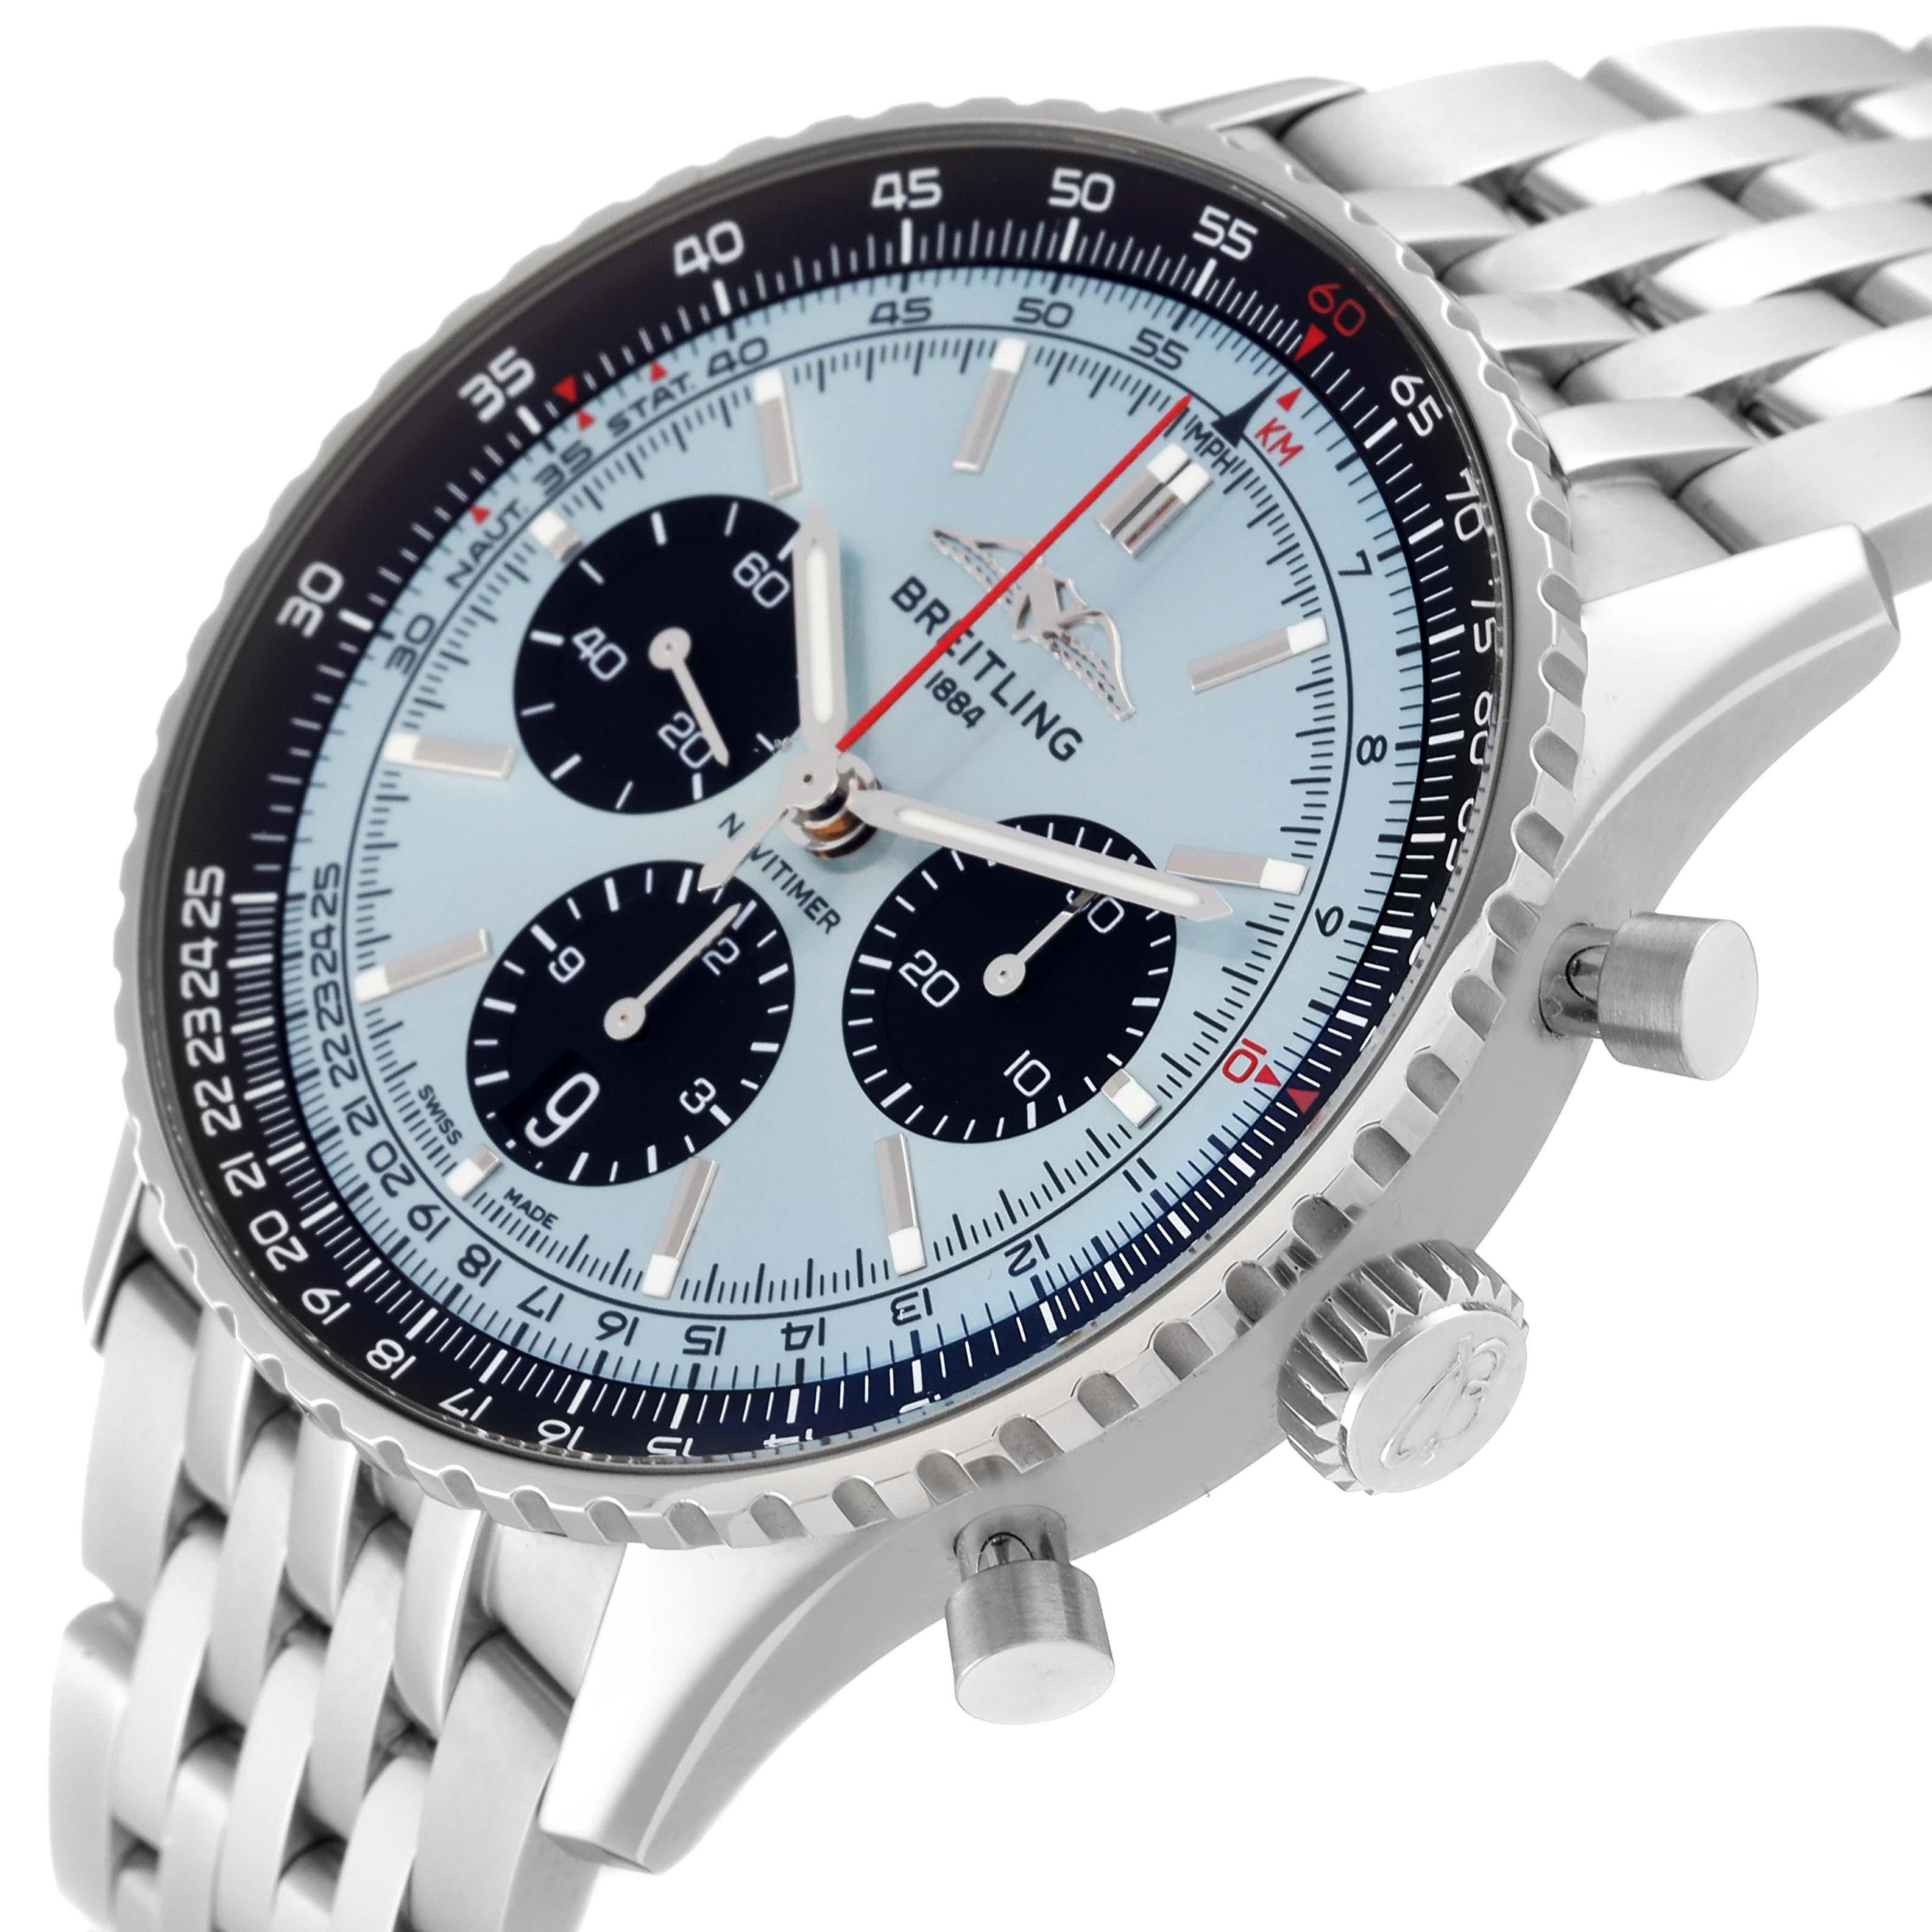 Breitling Navitimer B01 Blue Dial Steel Mens Watch AB0138 Box Card. Self-winding automatic officially certified chronometer movement. Chronograph function. Stainless steel case 43 mm in diameter. Case thickness 13.6 mm. Exhibition transparent